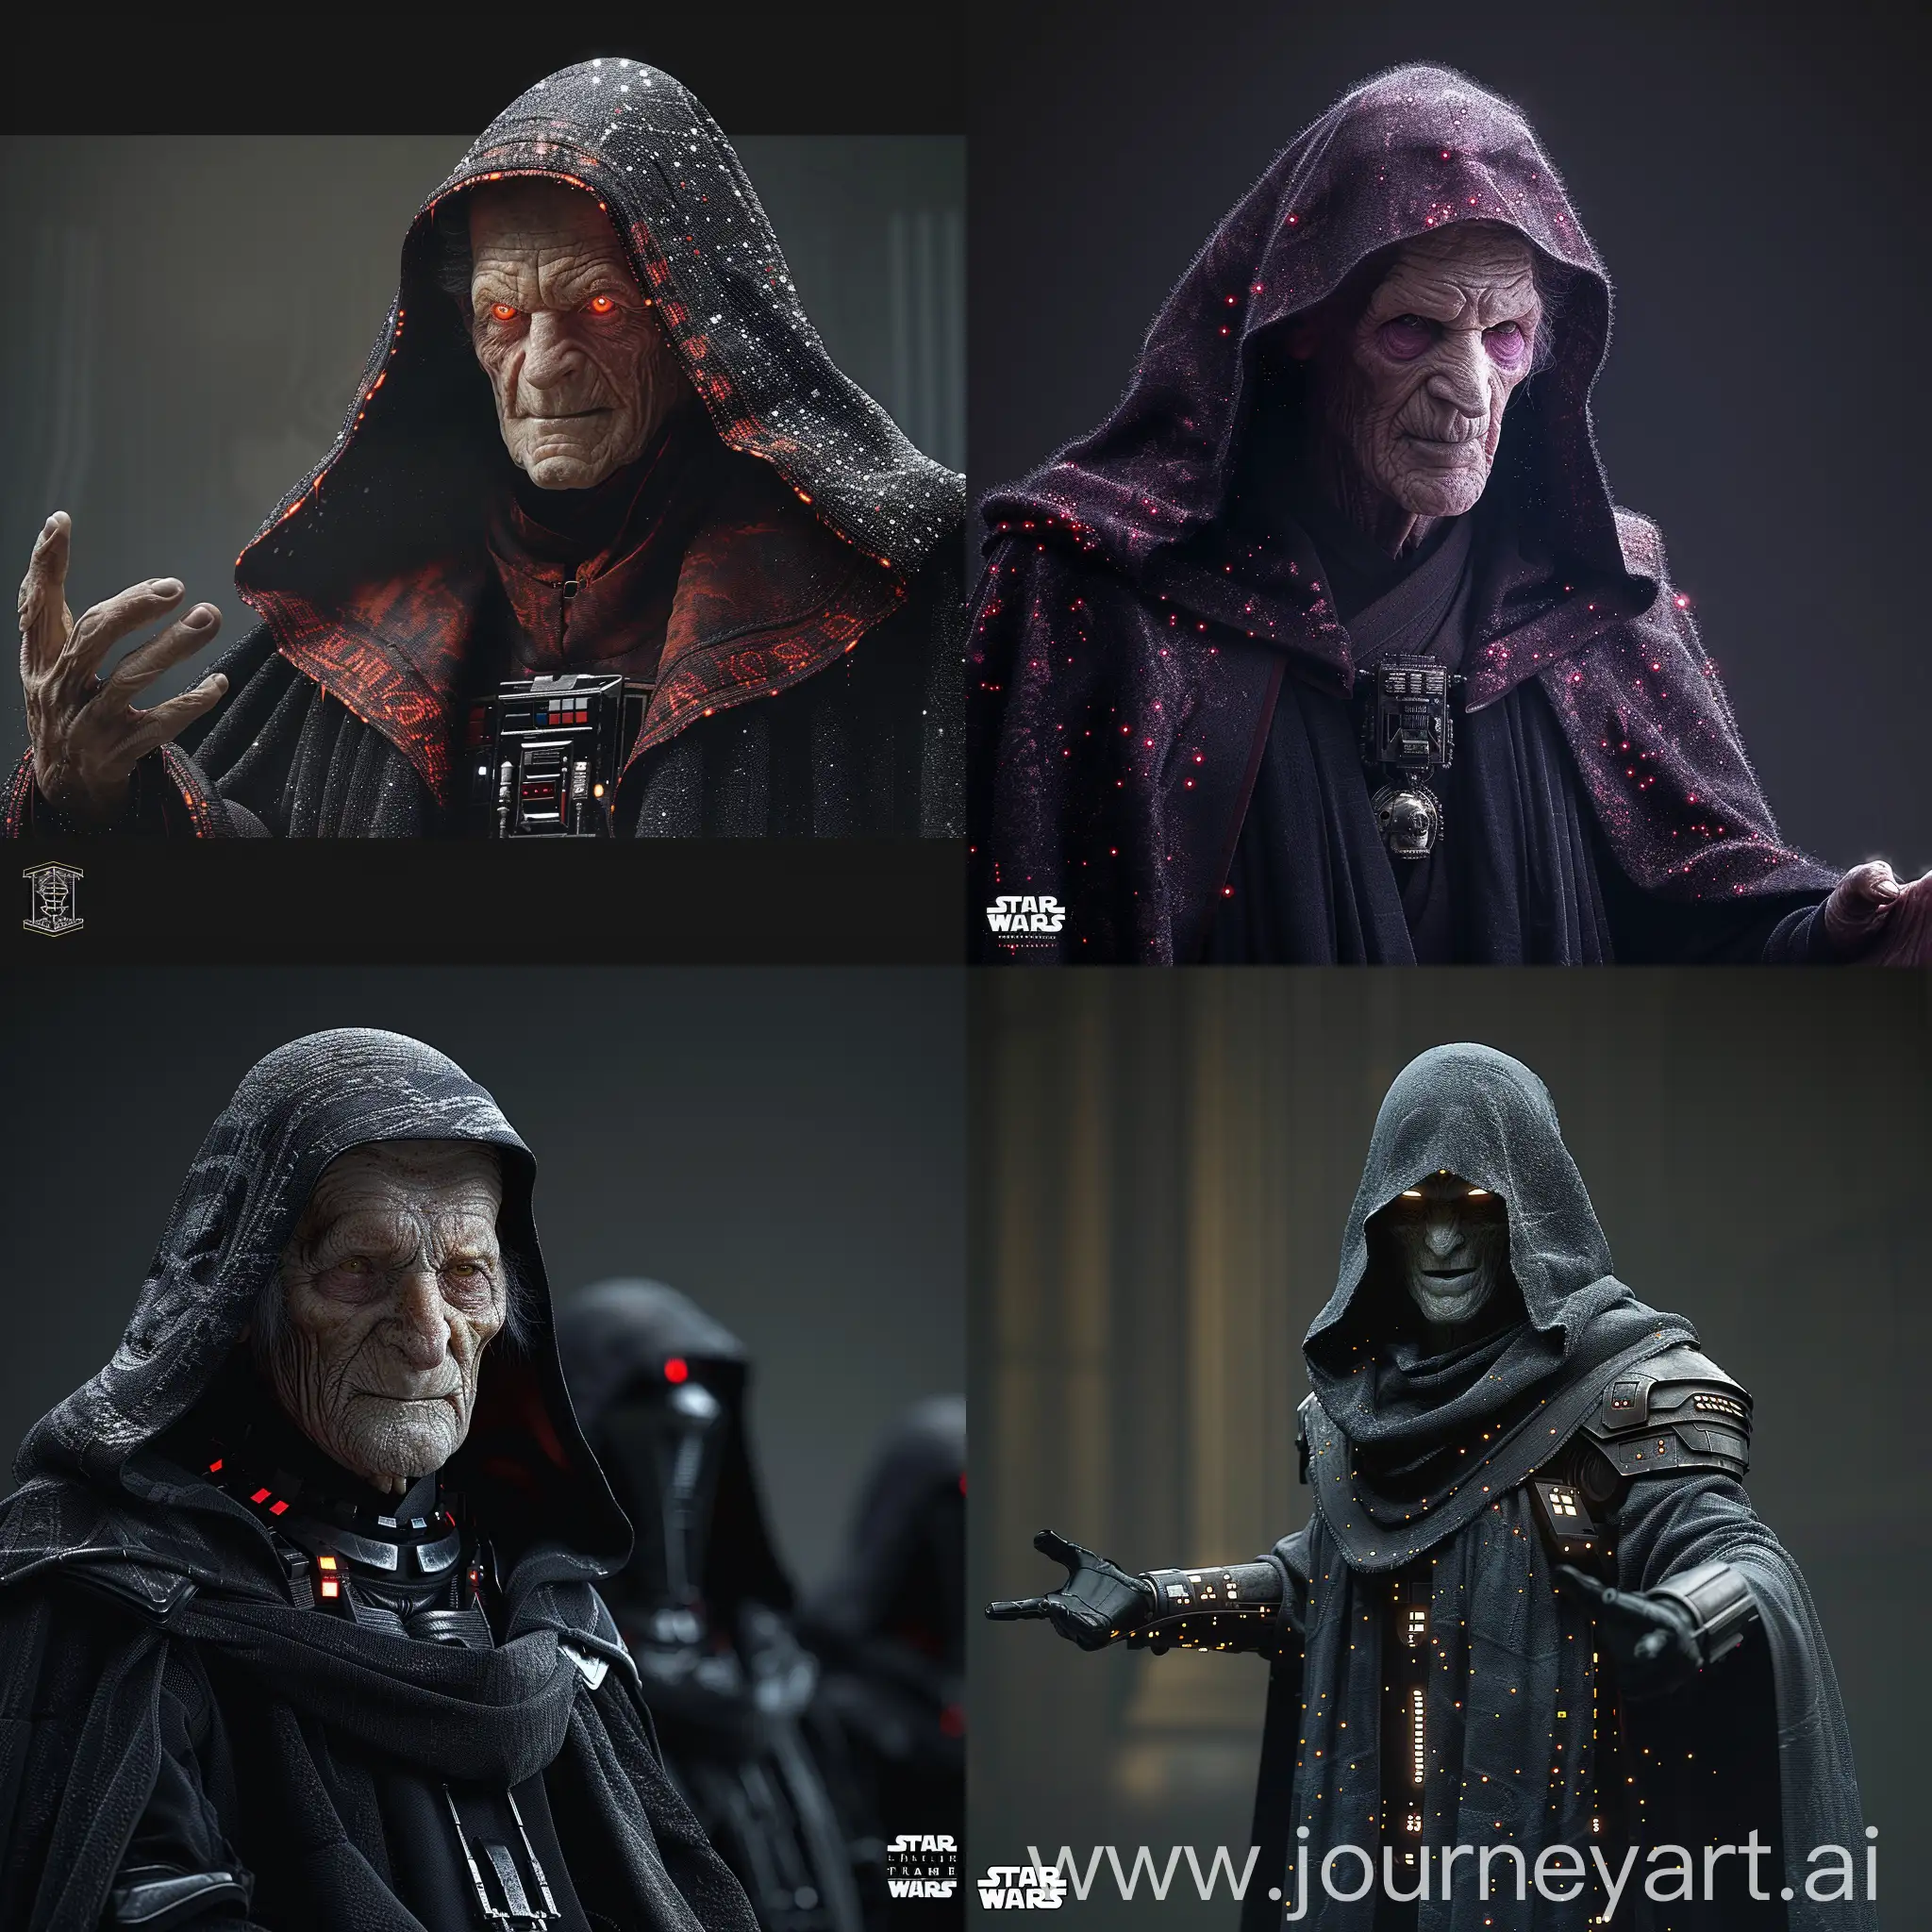 Futuristic-Emperor-Palpatine-with-Advanced-Cybernetic-Enhancements-and-SciFi-Abilities